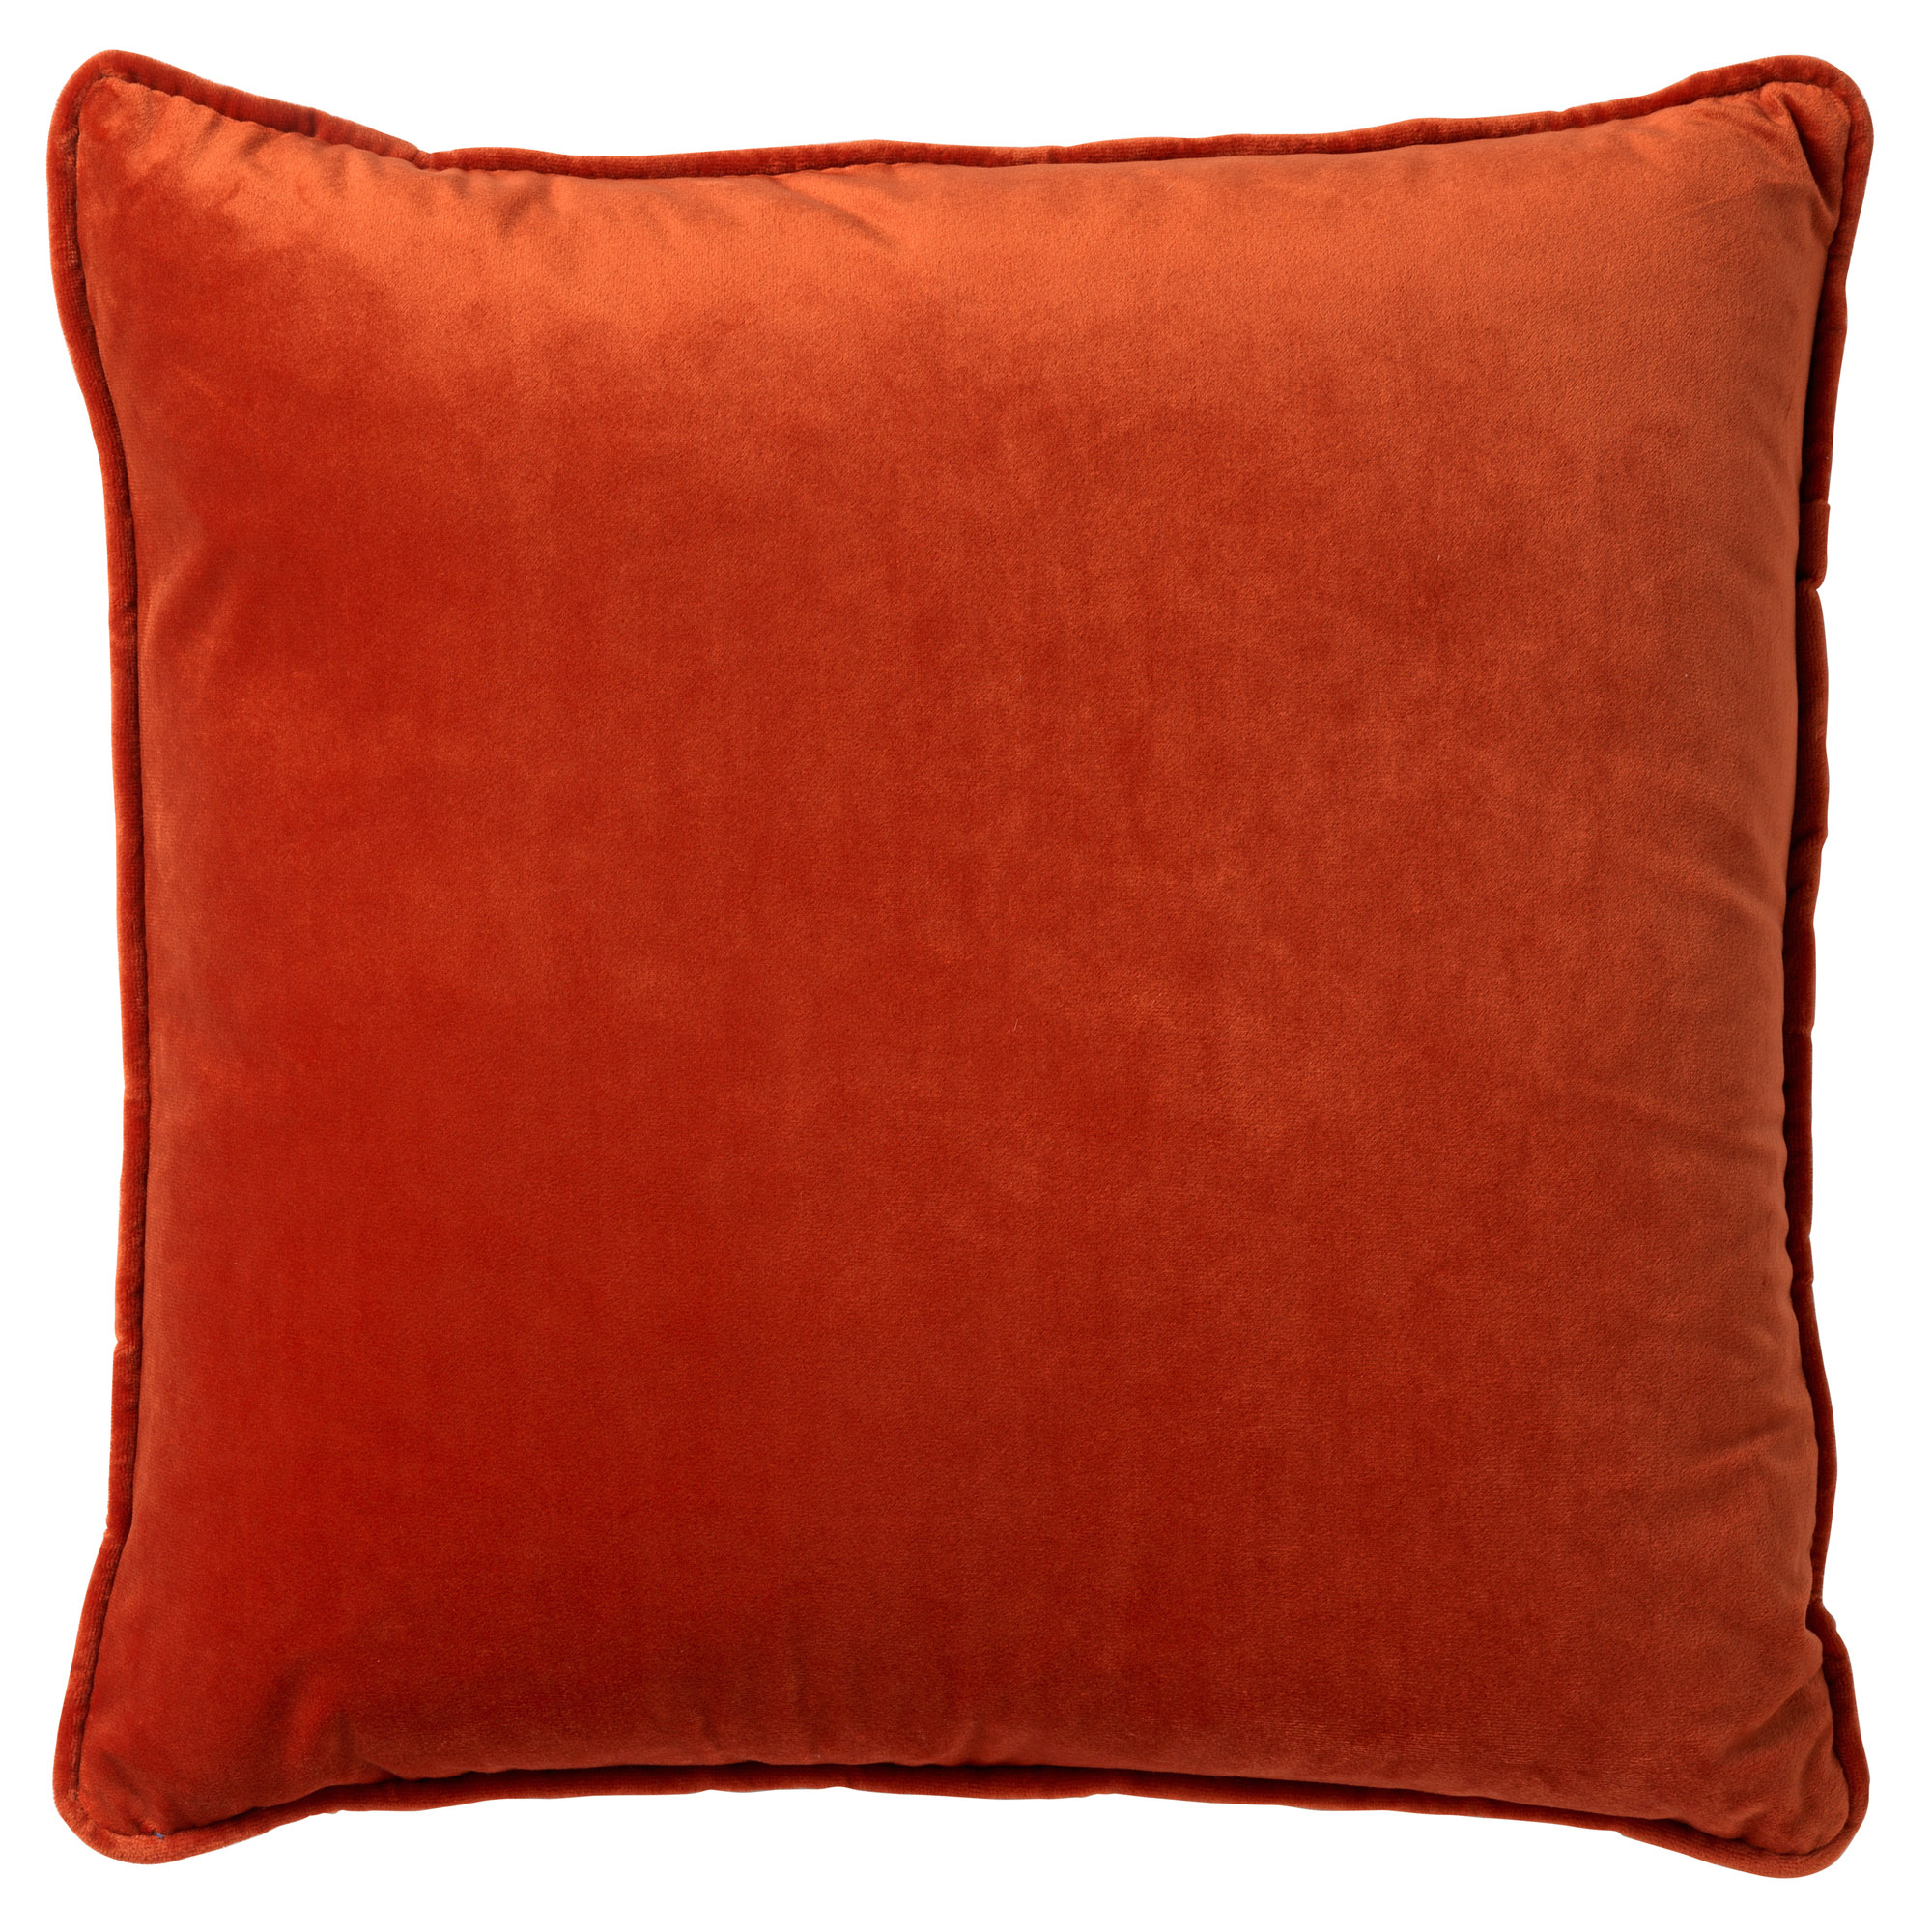 FINNA - Kussenhoes 45x45 cm 100% gerecycled polyester - Eco Line collectie - Potters Clay - oranje